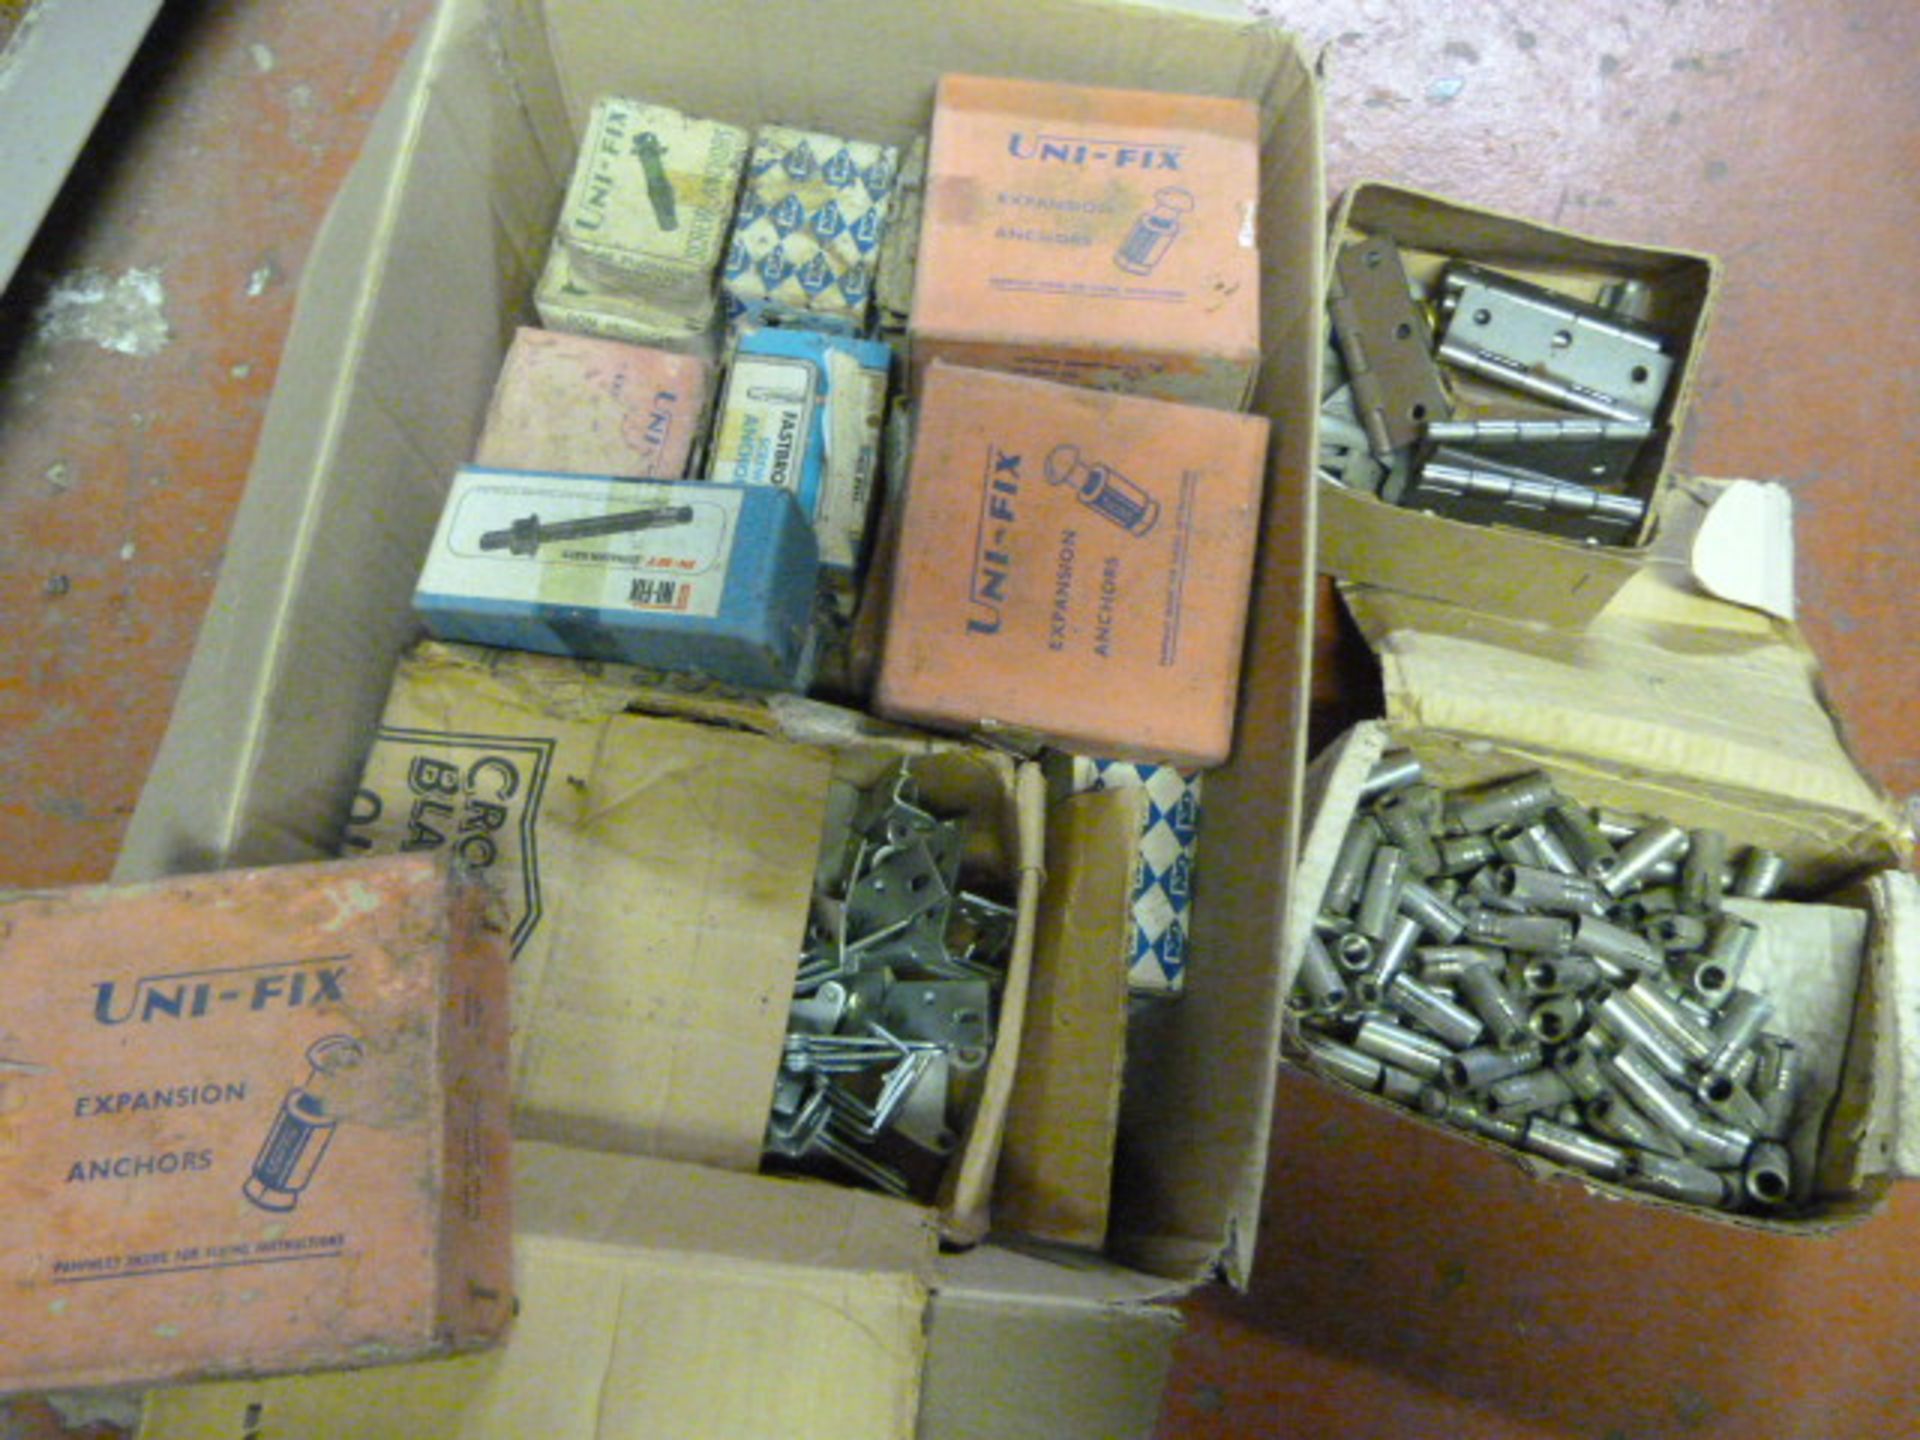 Box of Hinges, Expansion Anchors, Screw Anchors,